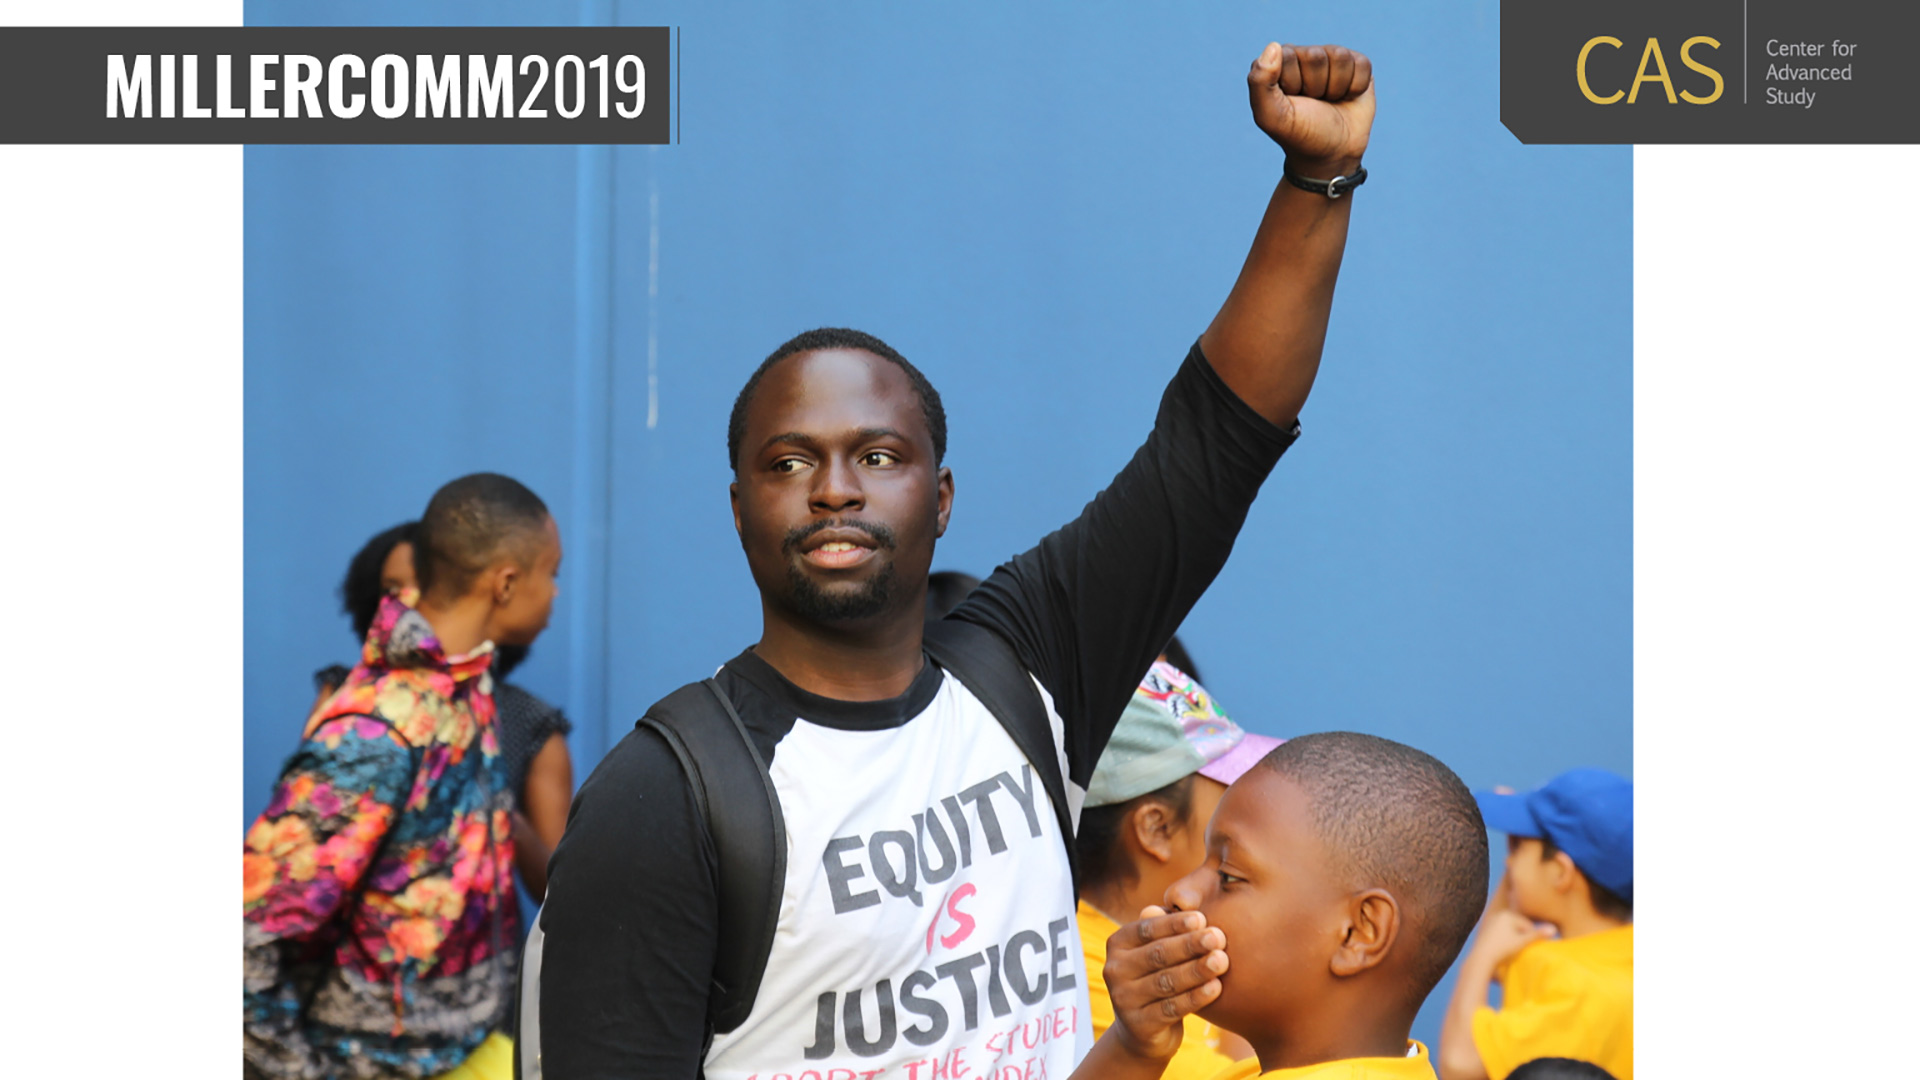 MillerComm 2019, with man holding fist in the air.